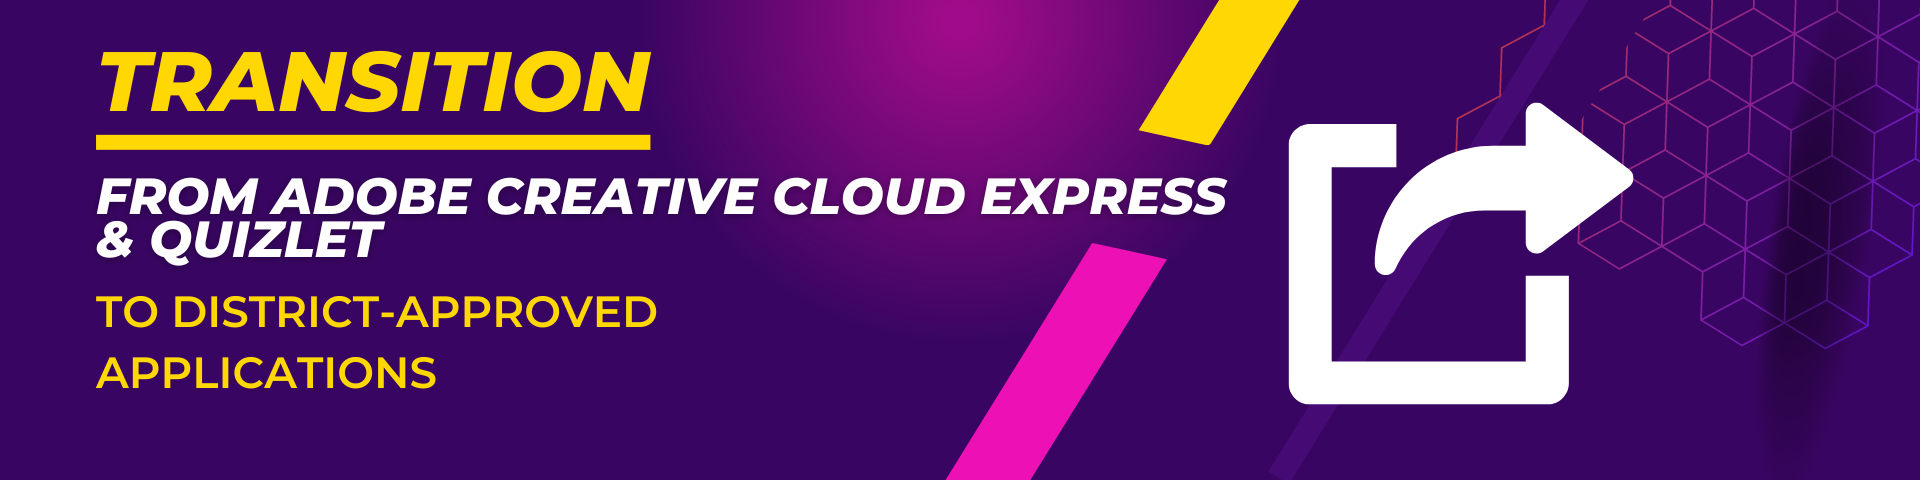 Transition from Adobe Creative Cloud Express and Quizlet